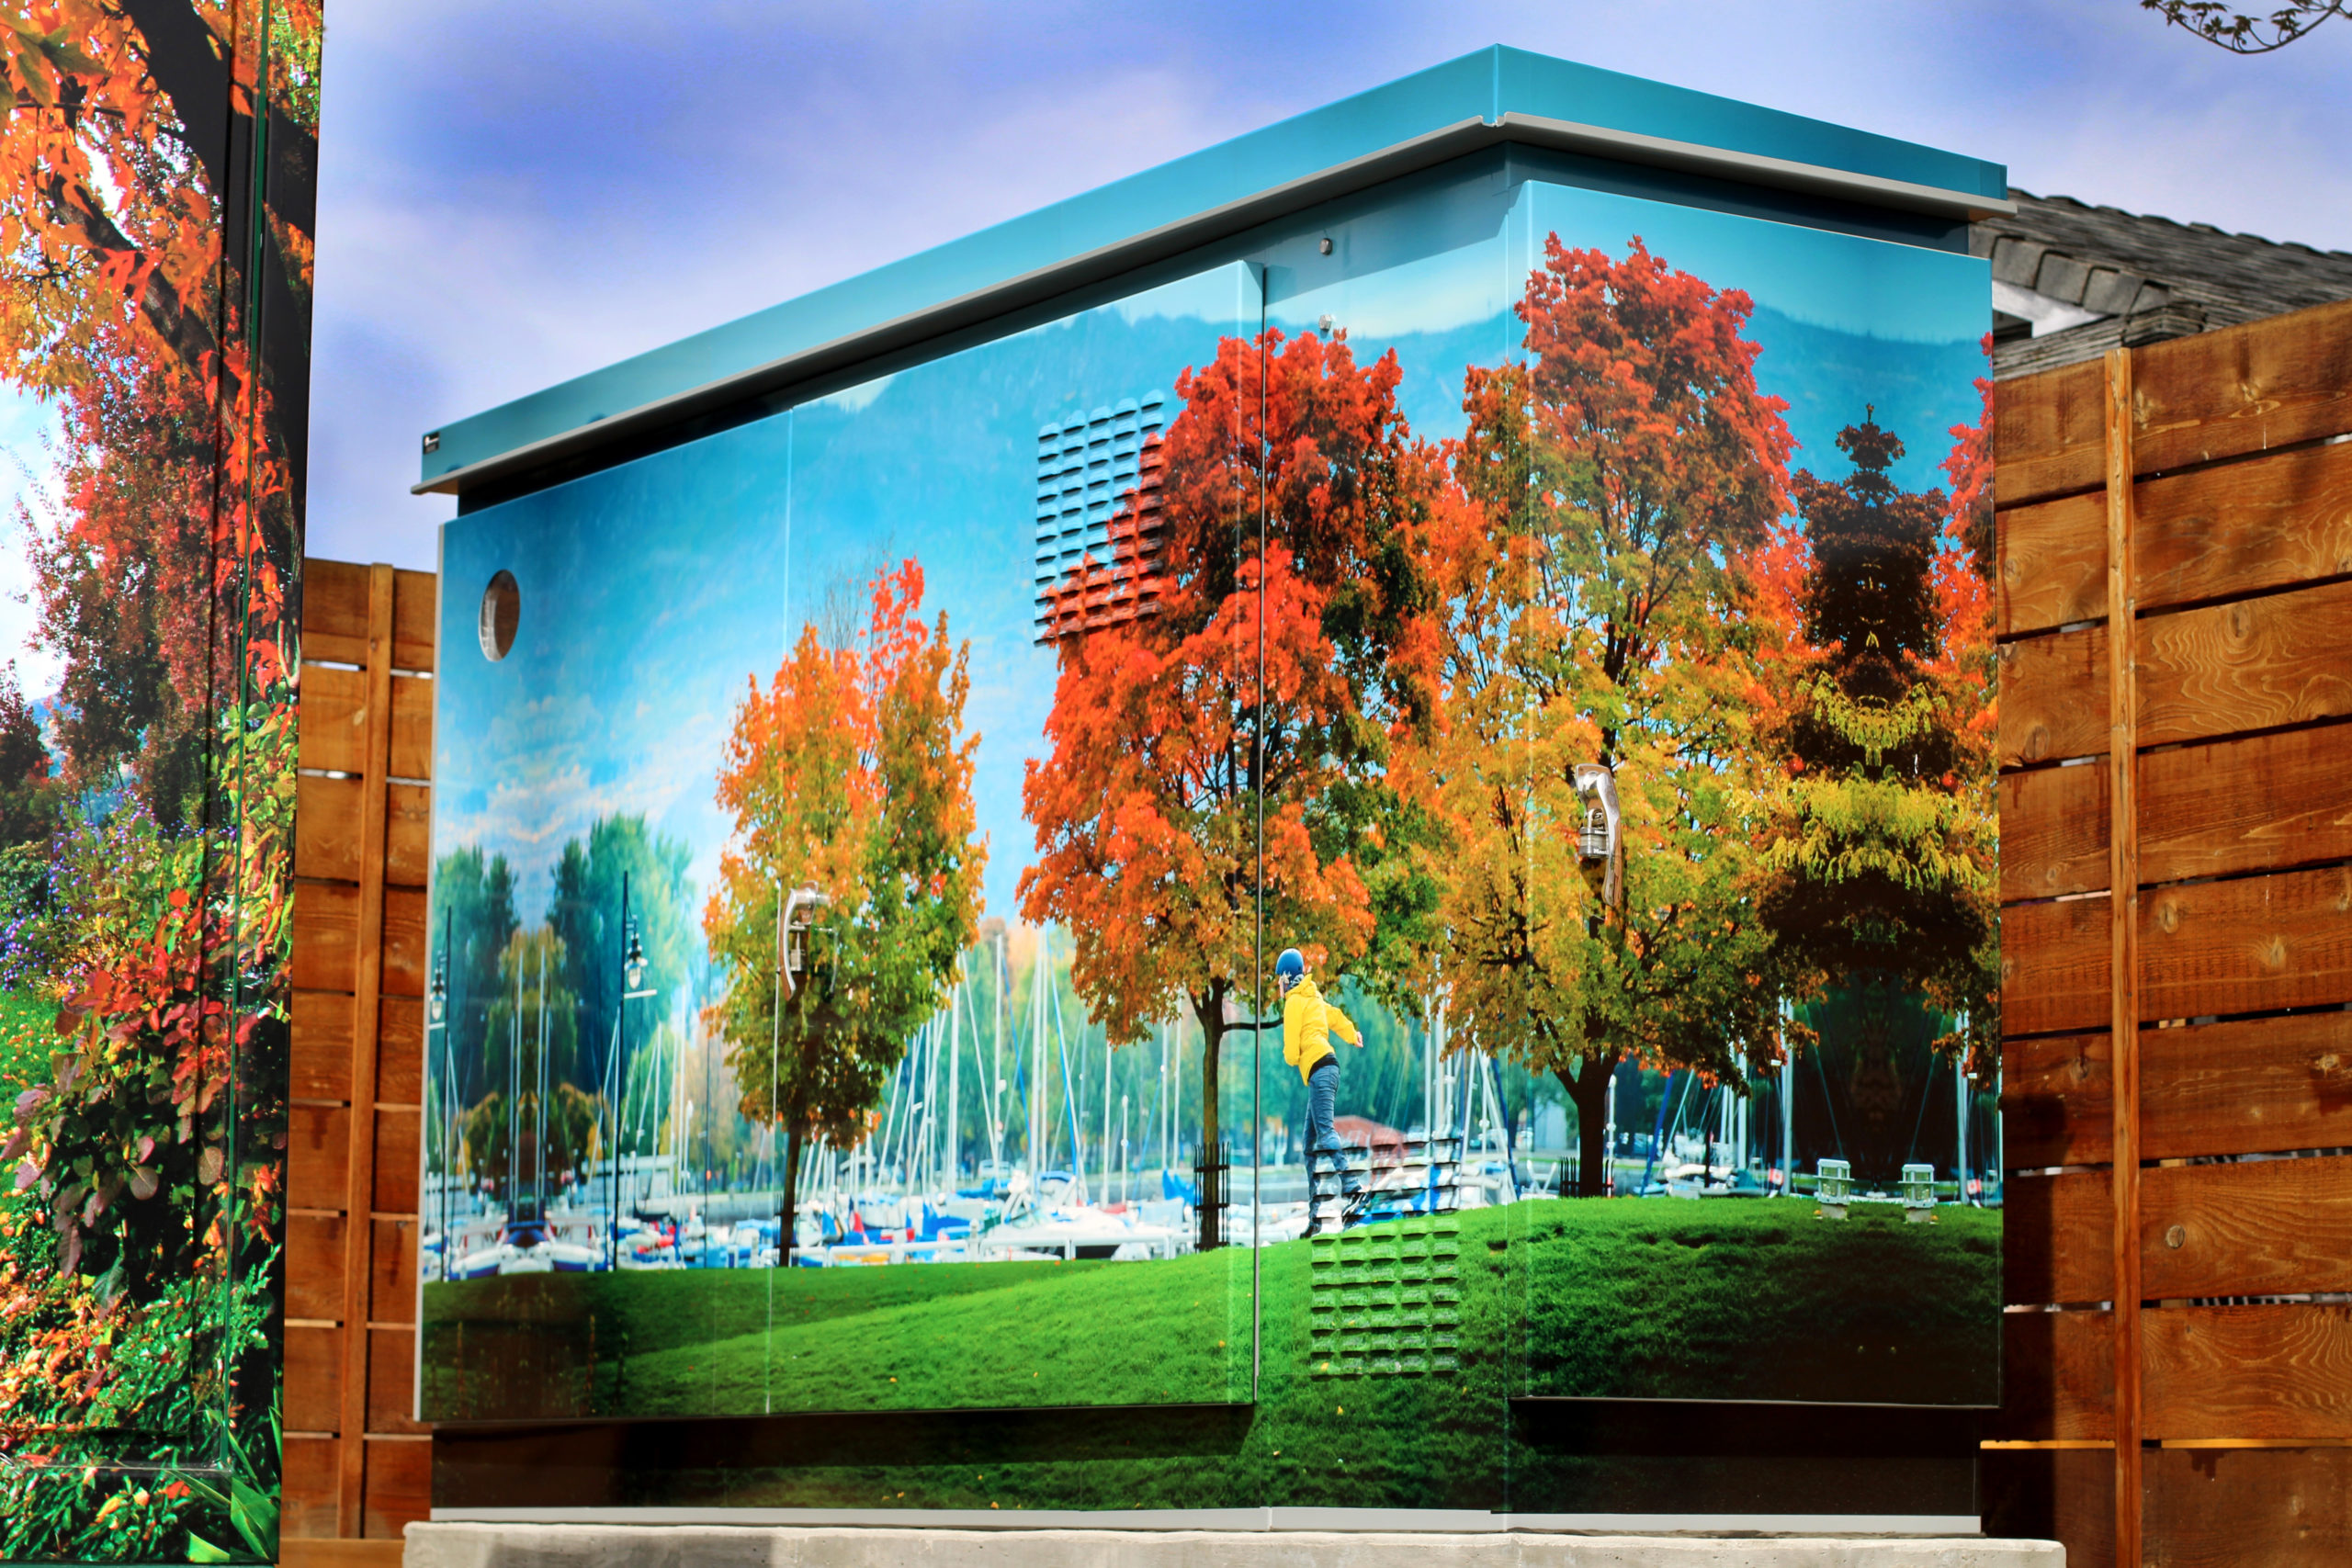 water and wastewater management lift station with a beautiful mural painted of trees in a park